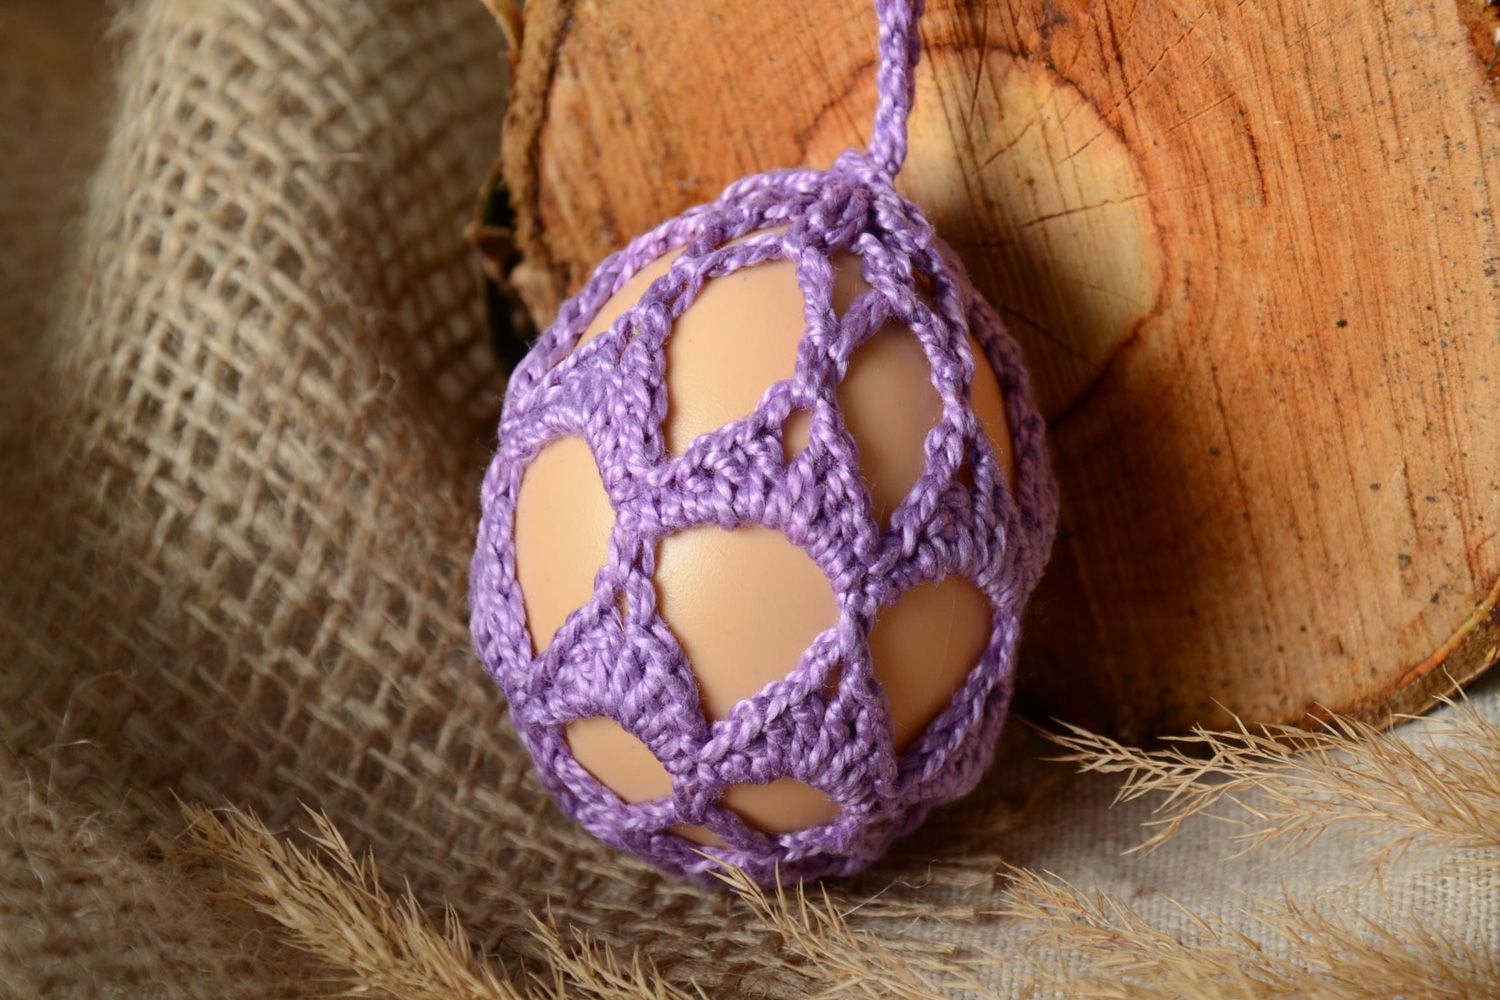 Homemade lilac interior pendant Easter egg woven over with threads photo 1